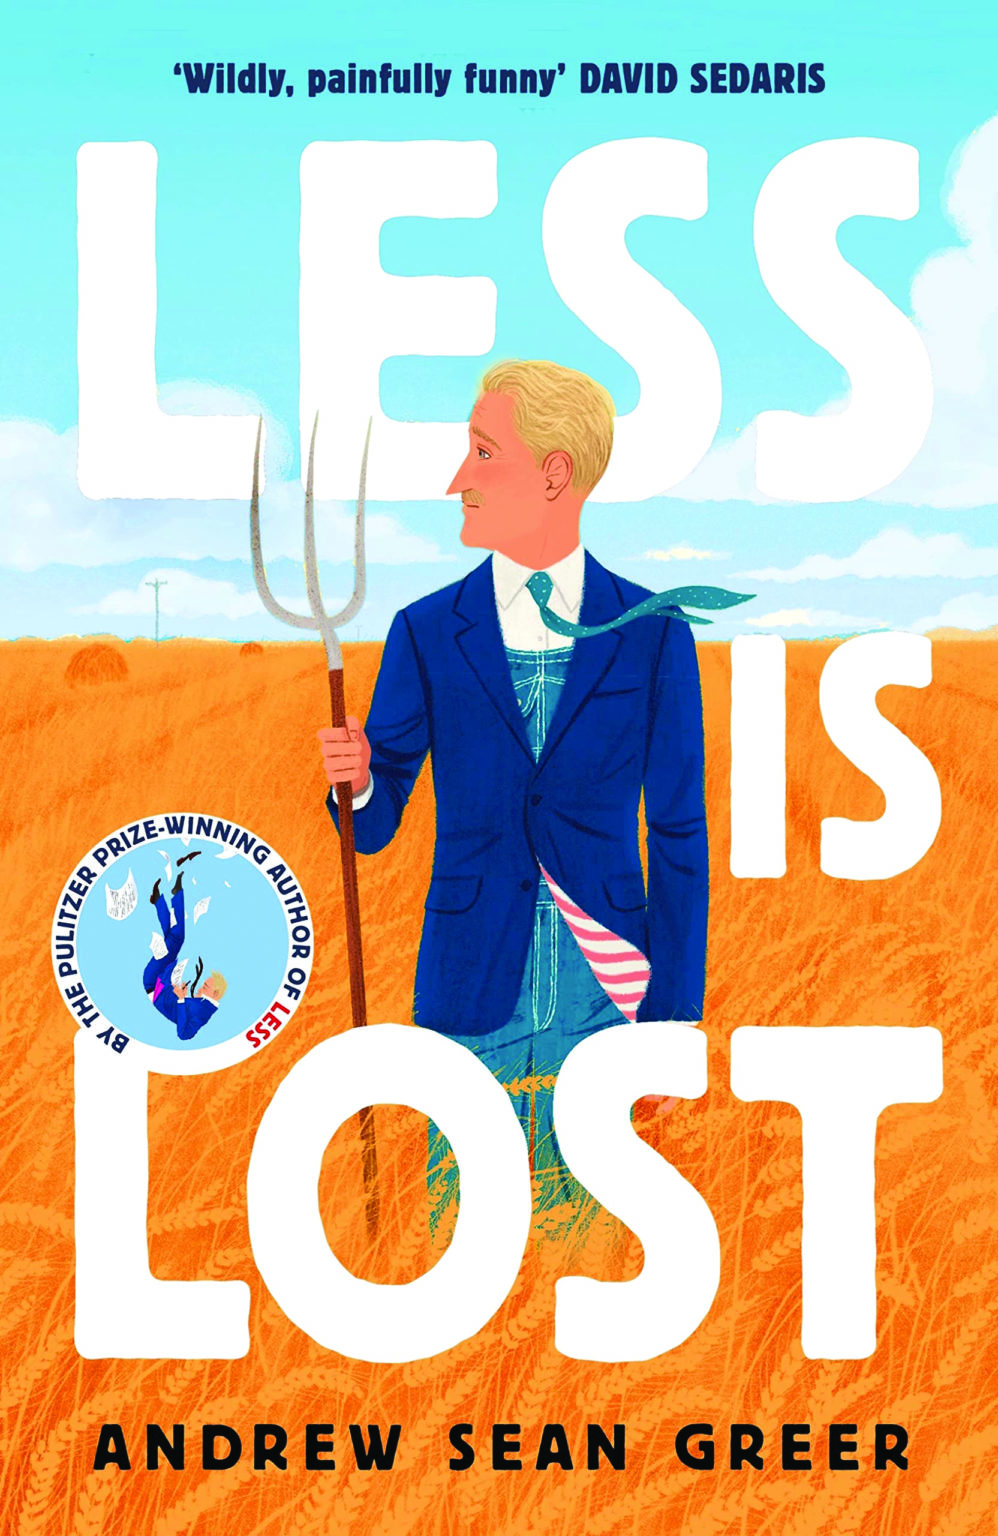 greer less is lost